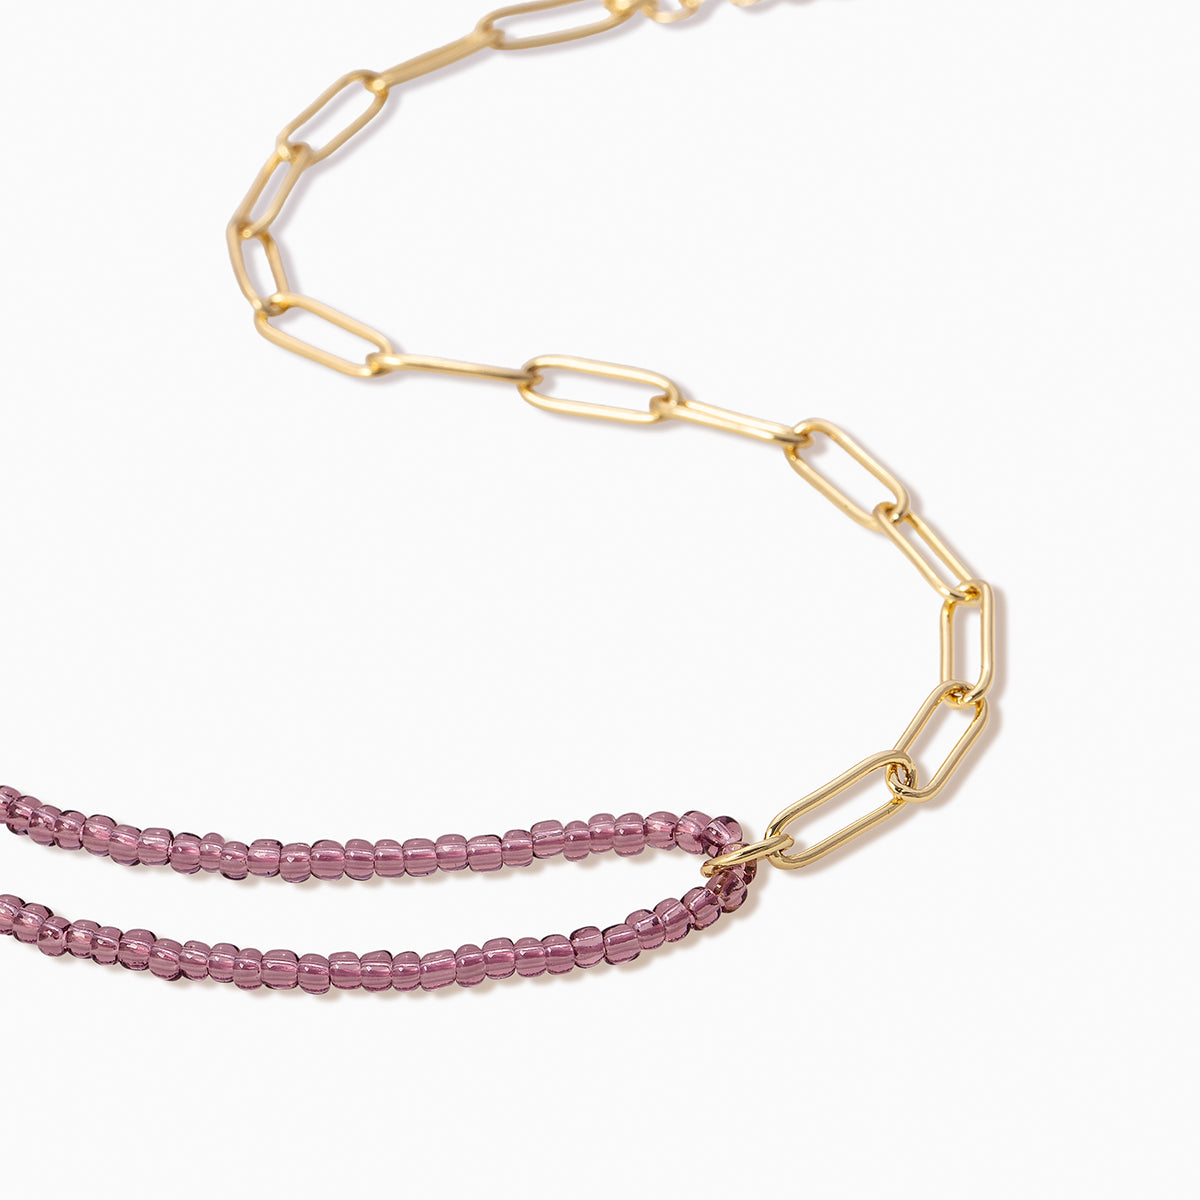 Bead and Chain Necklace | Gold | Product Detail Image | Uncommon James